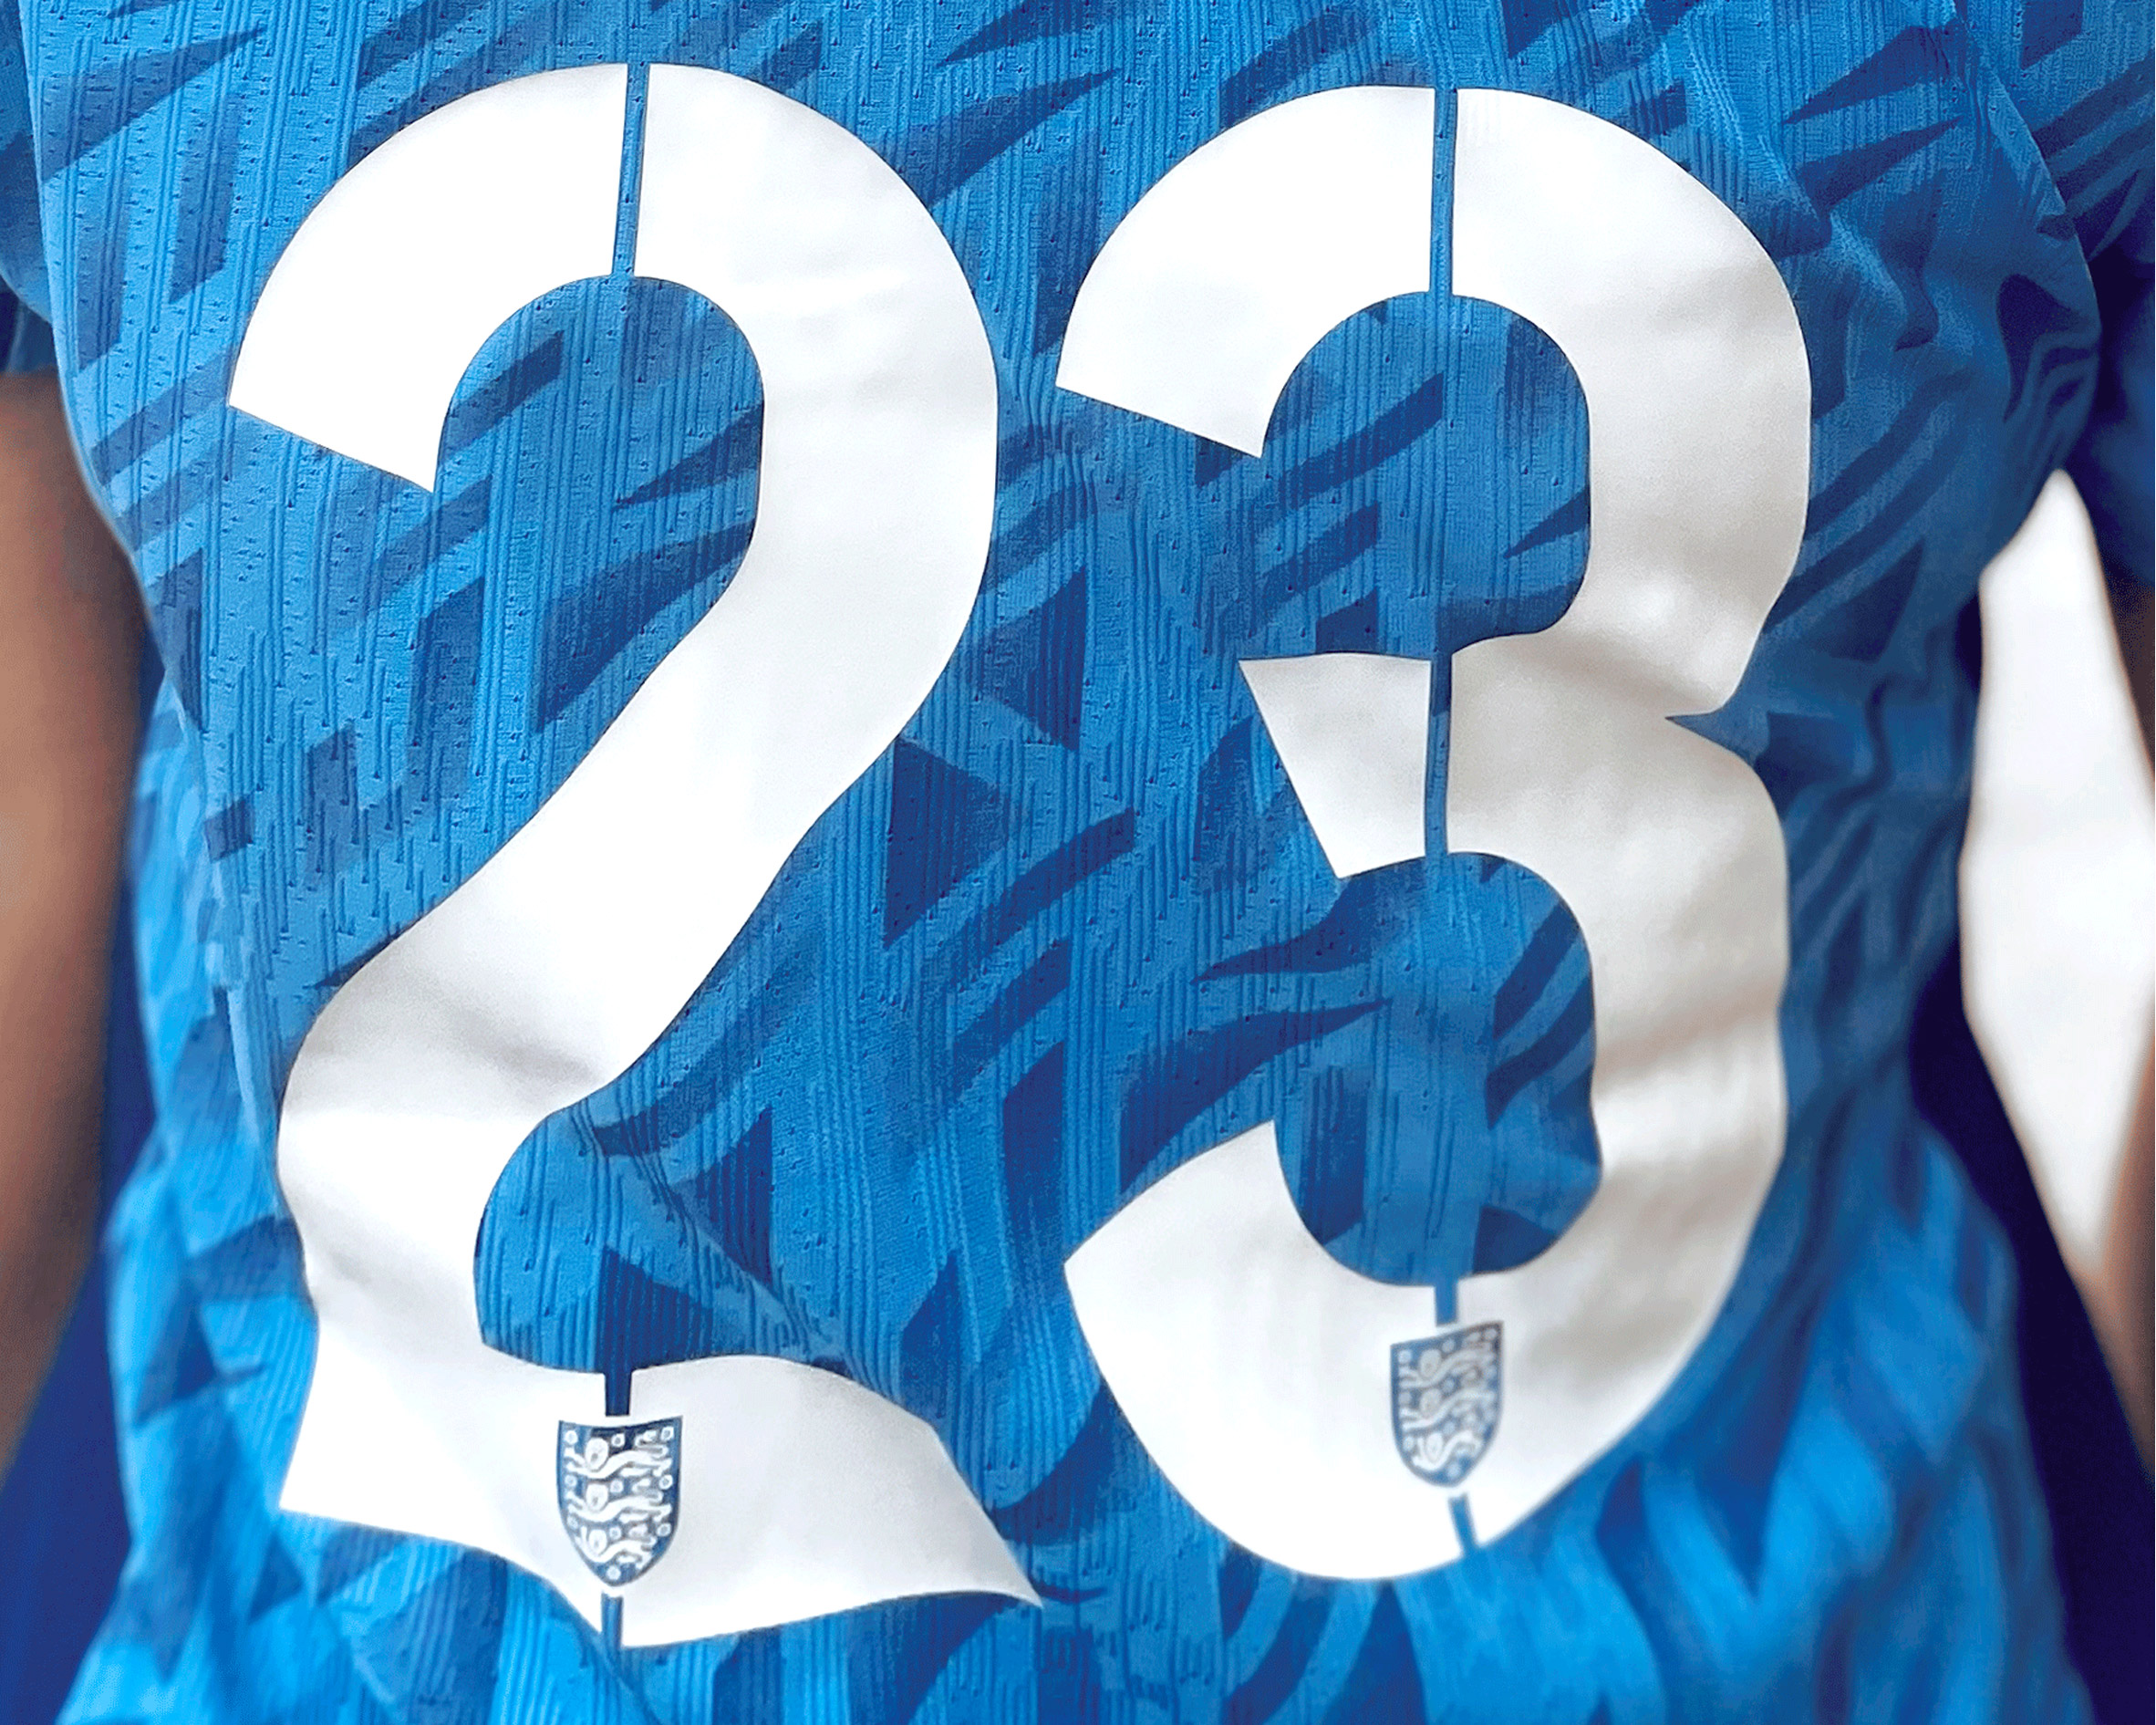 Stencil-like typeface by Neville Brody on the back of a football shirt